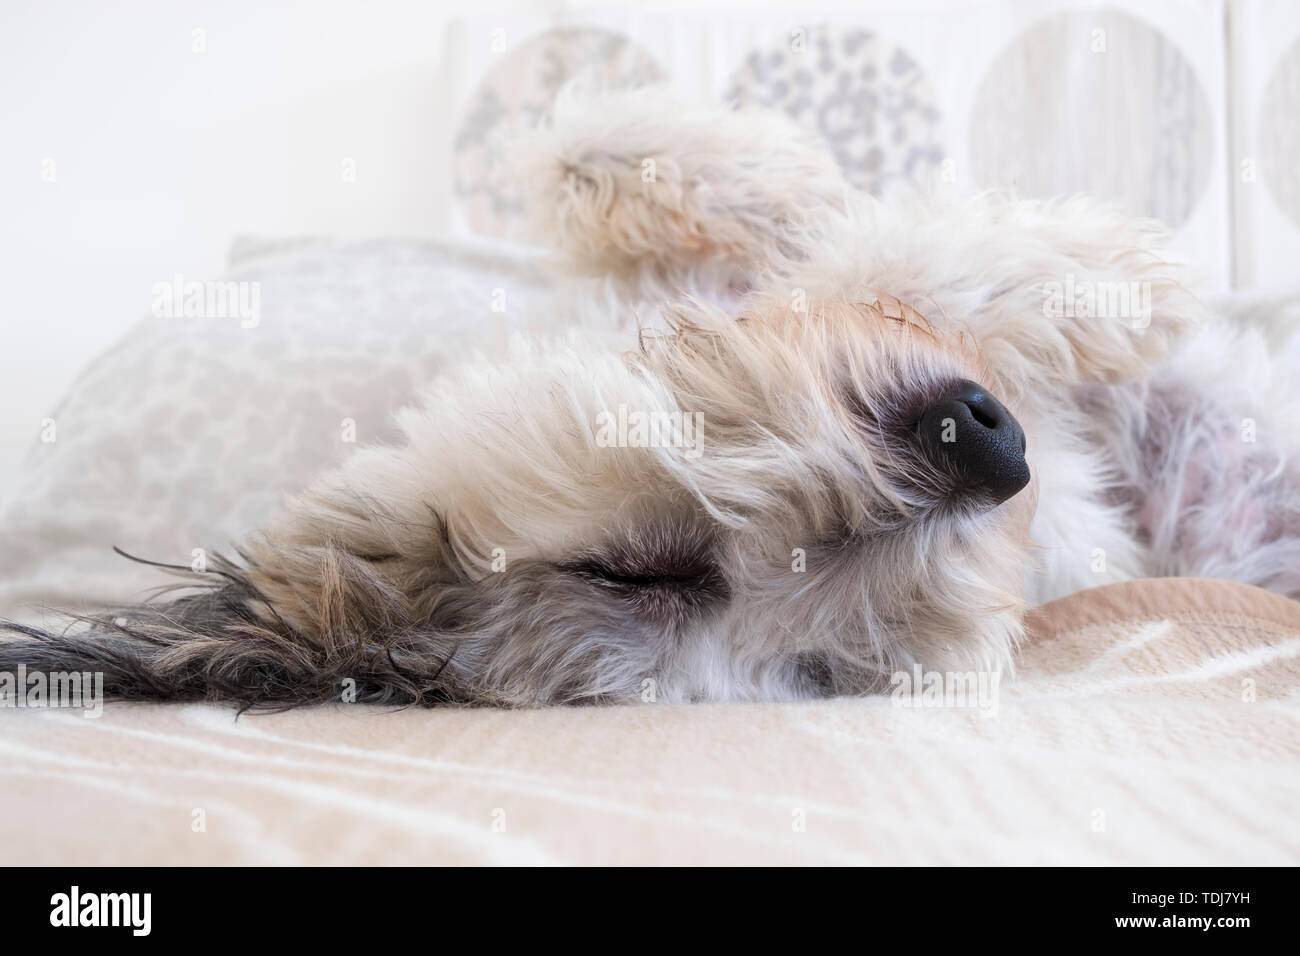 A 10 month old male Romainian Mioritic Shepherd dog asleep, upside down on a bed. Stock Photo